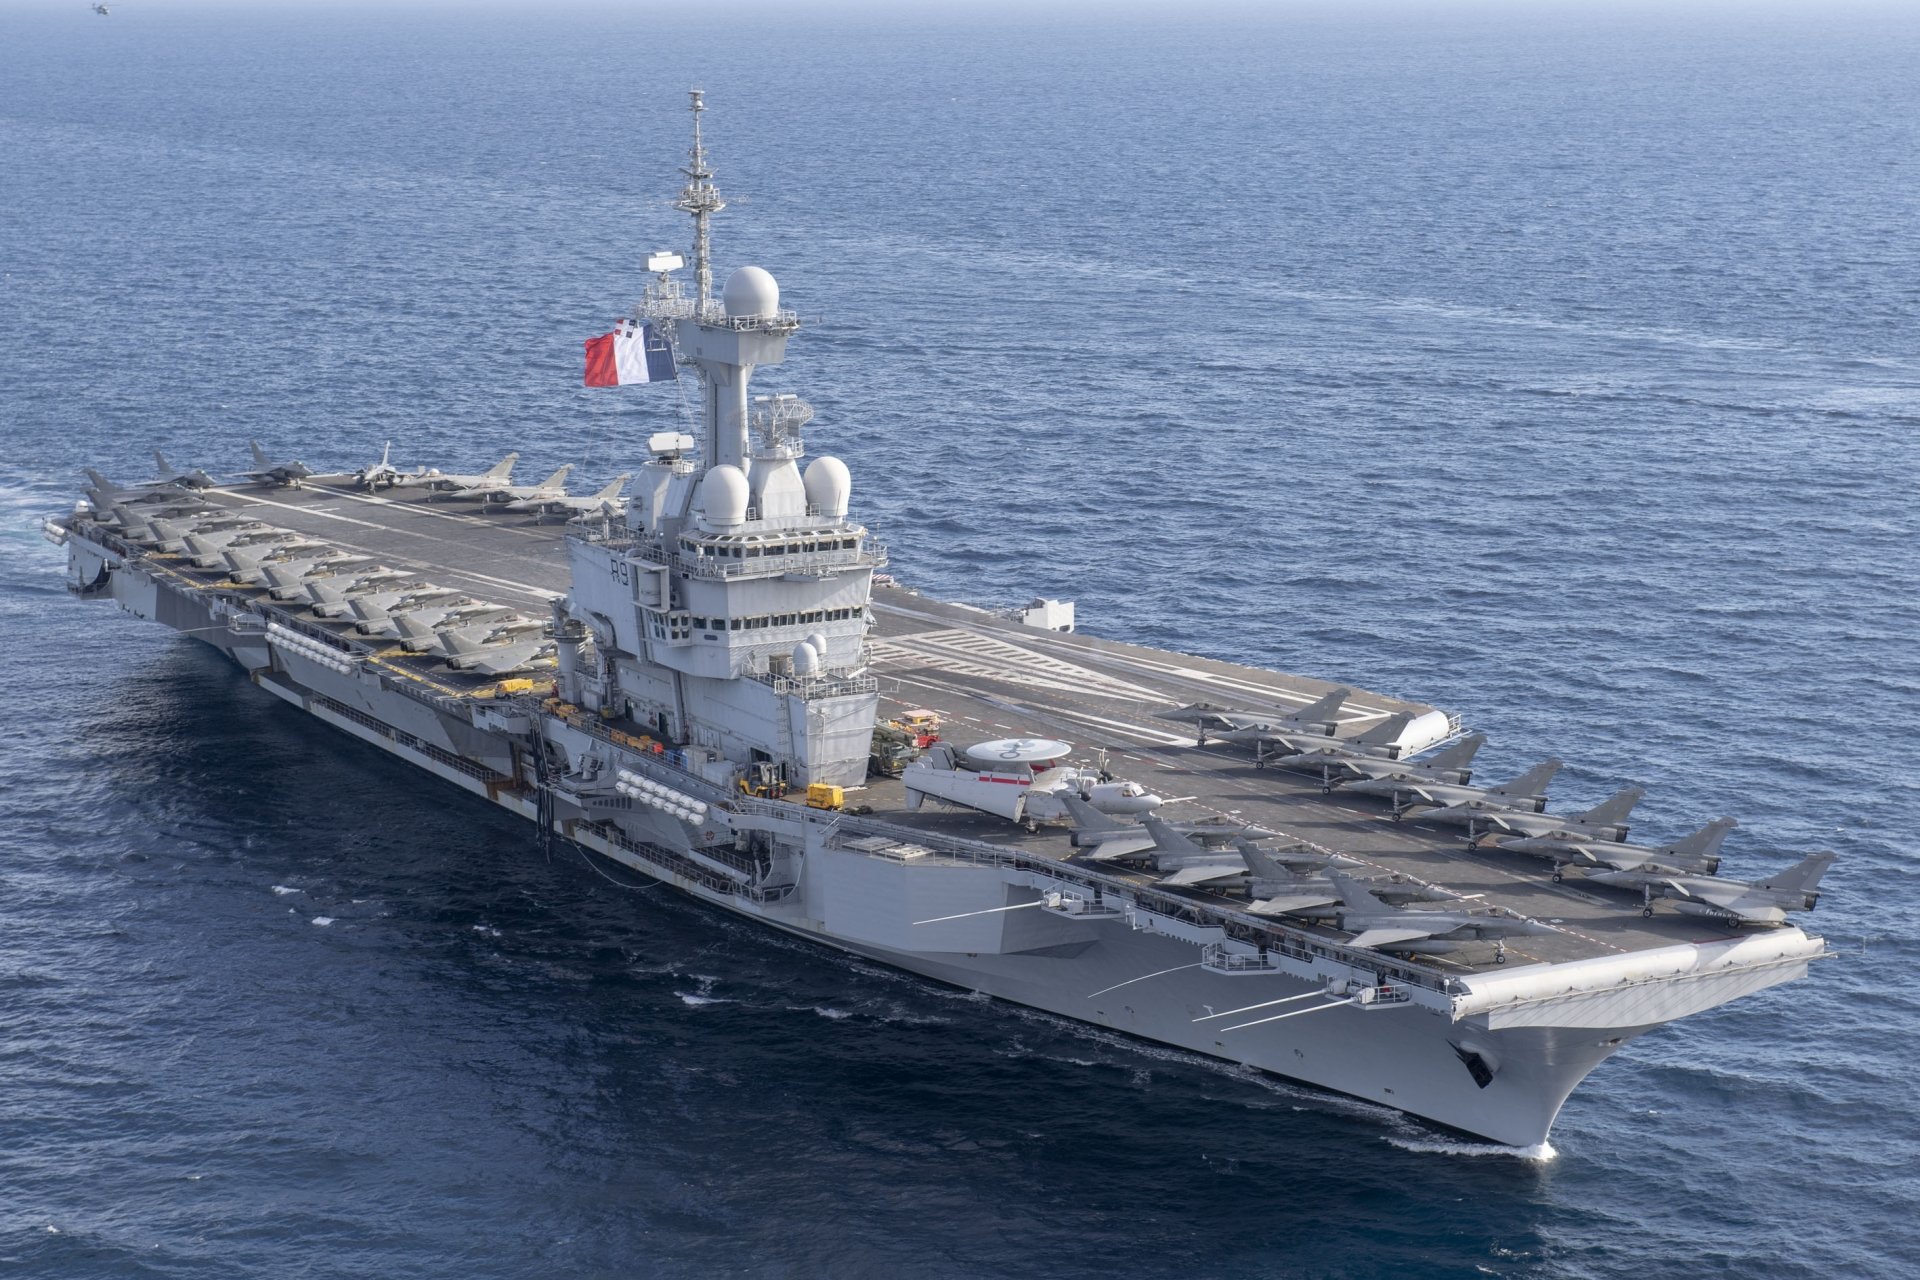 The French nuclear aircraft carrier "Charles de Gaulle"